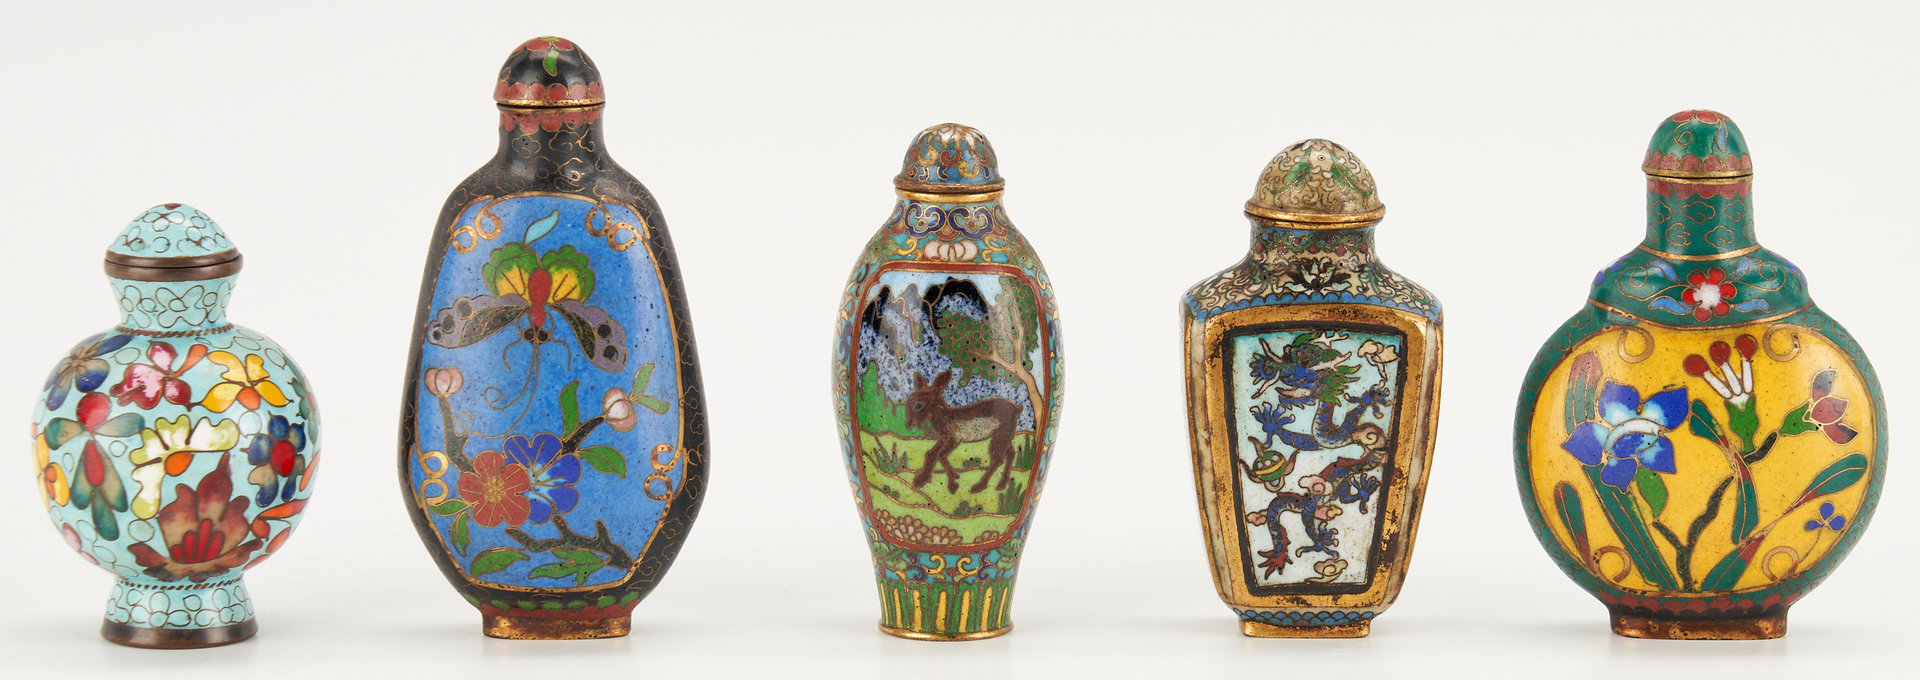 Lot 290: 10 Chinese Cloisonne Snuff Bottles, incl. Double Snuff Bottle